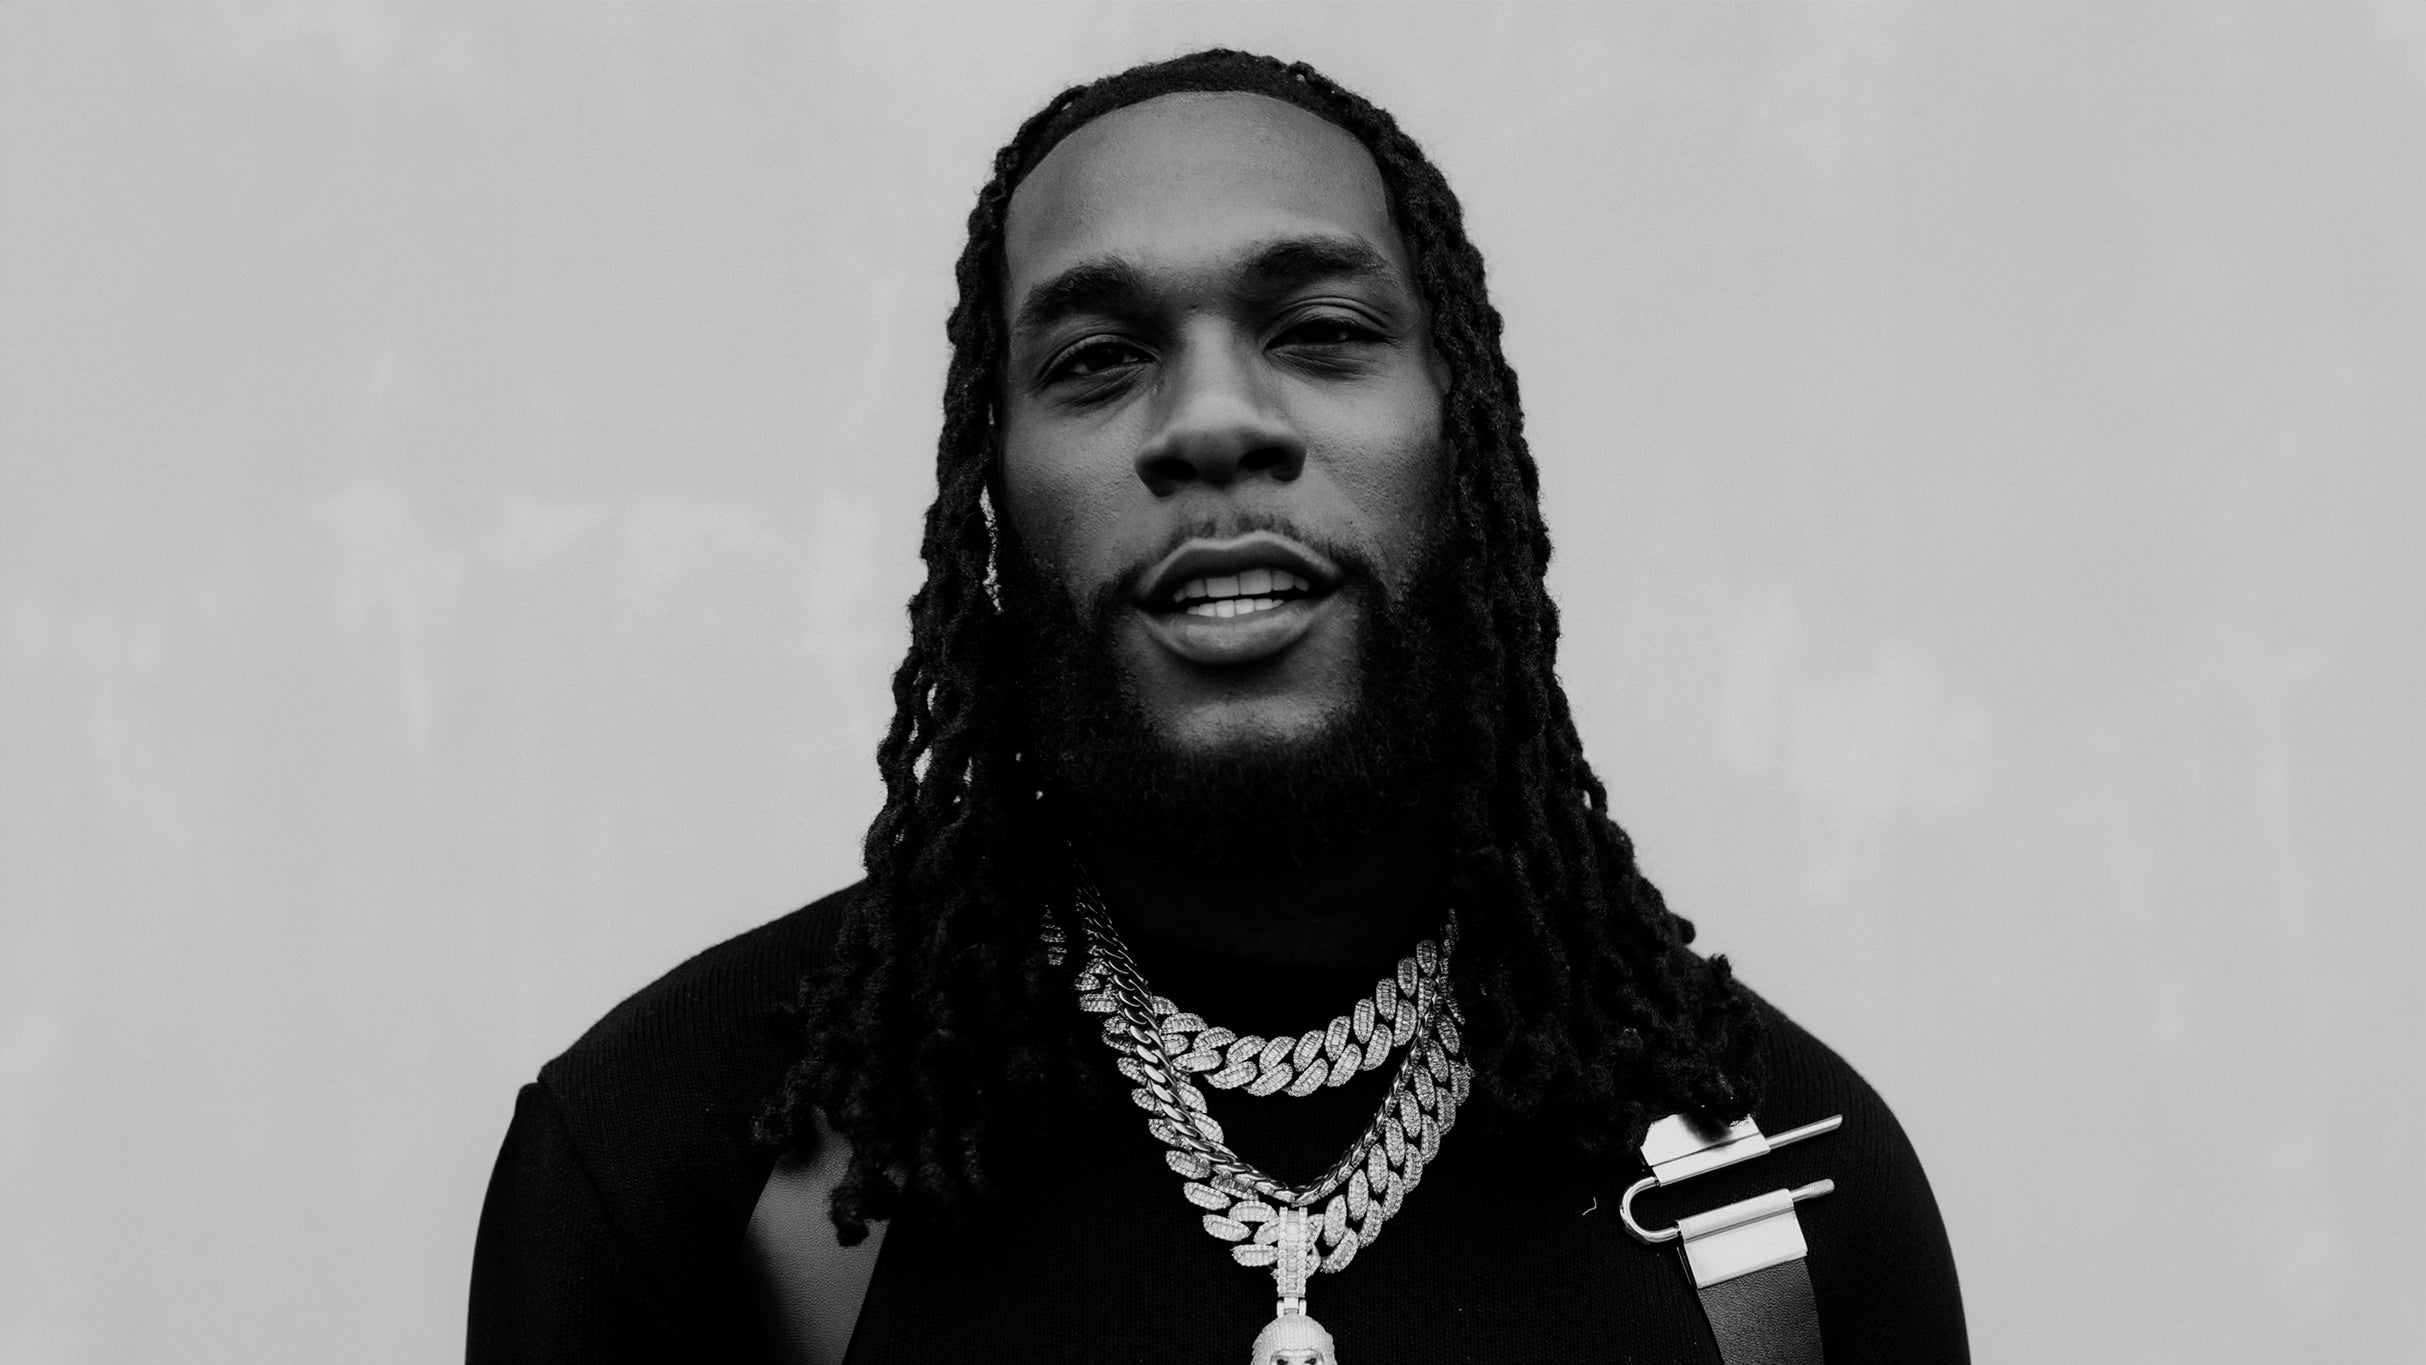 Burna Boy: I Told Them Tour at Capital One Arena